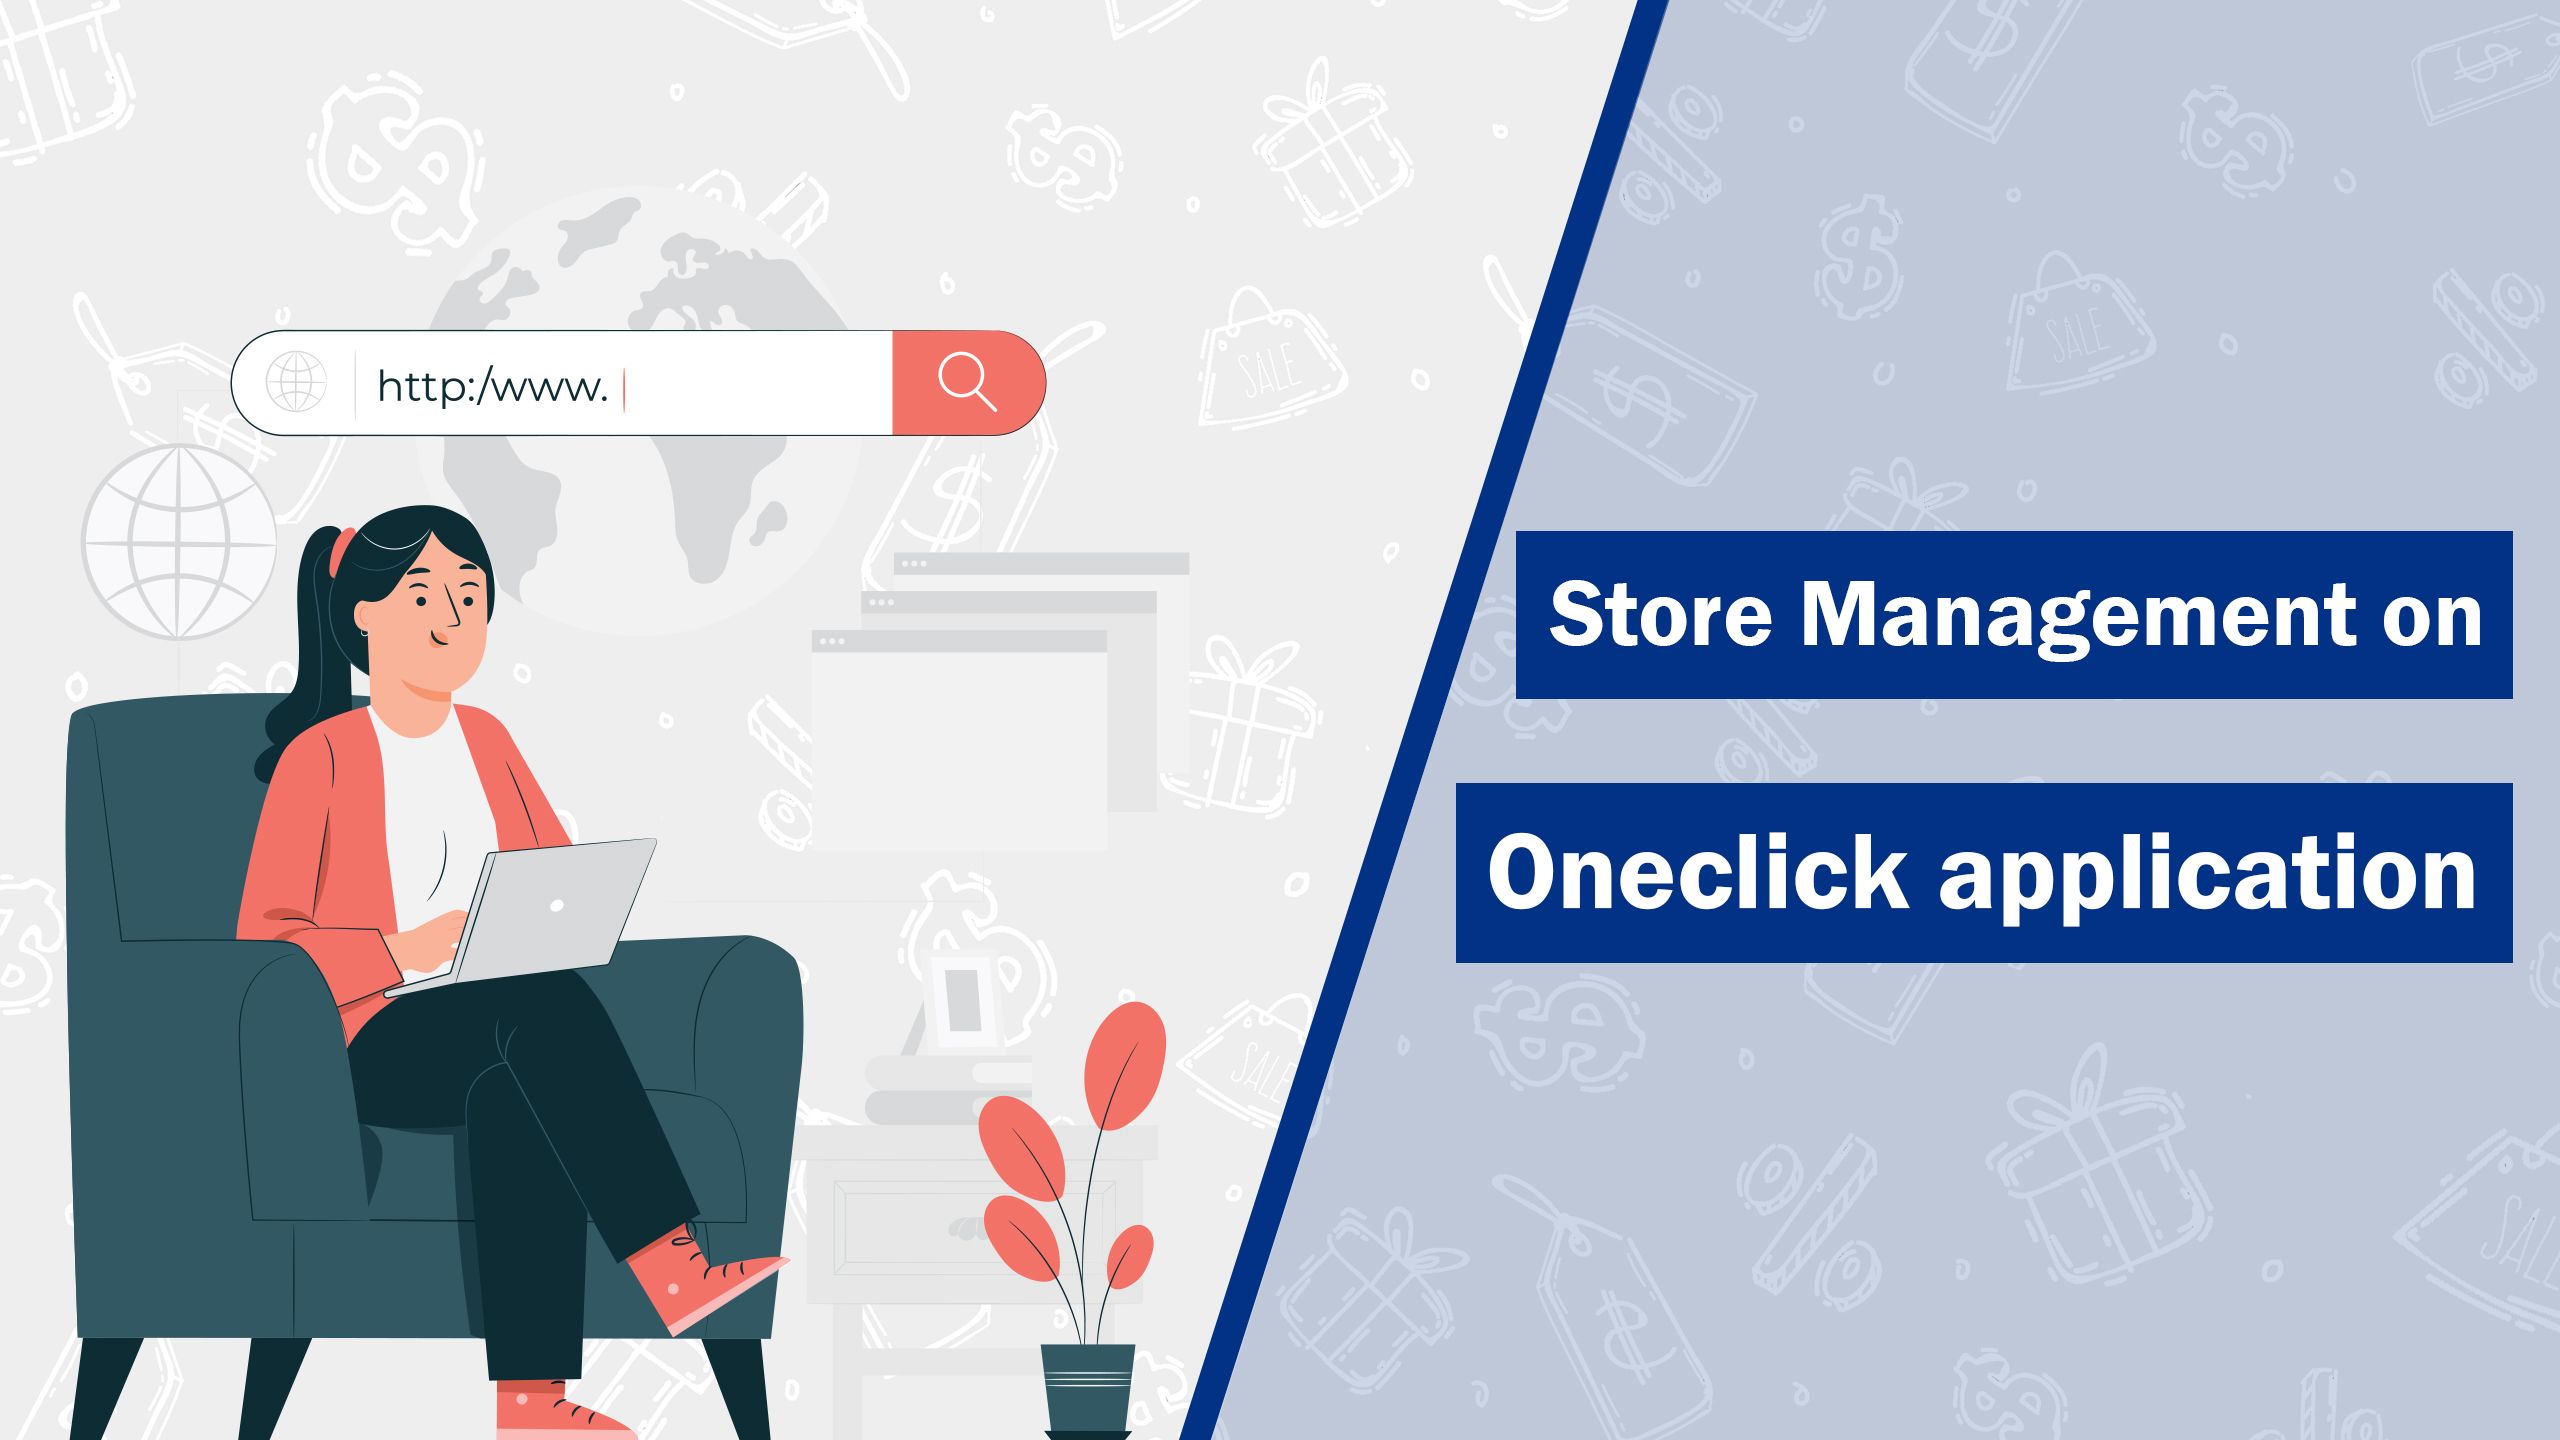 Store Management on ONECLICK App